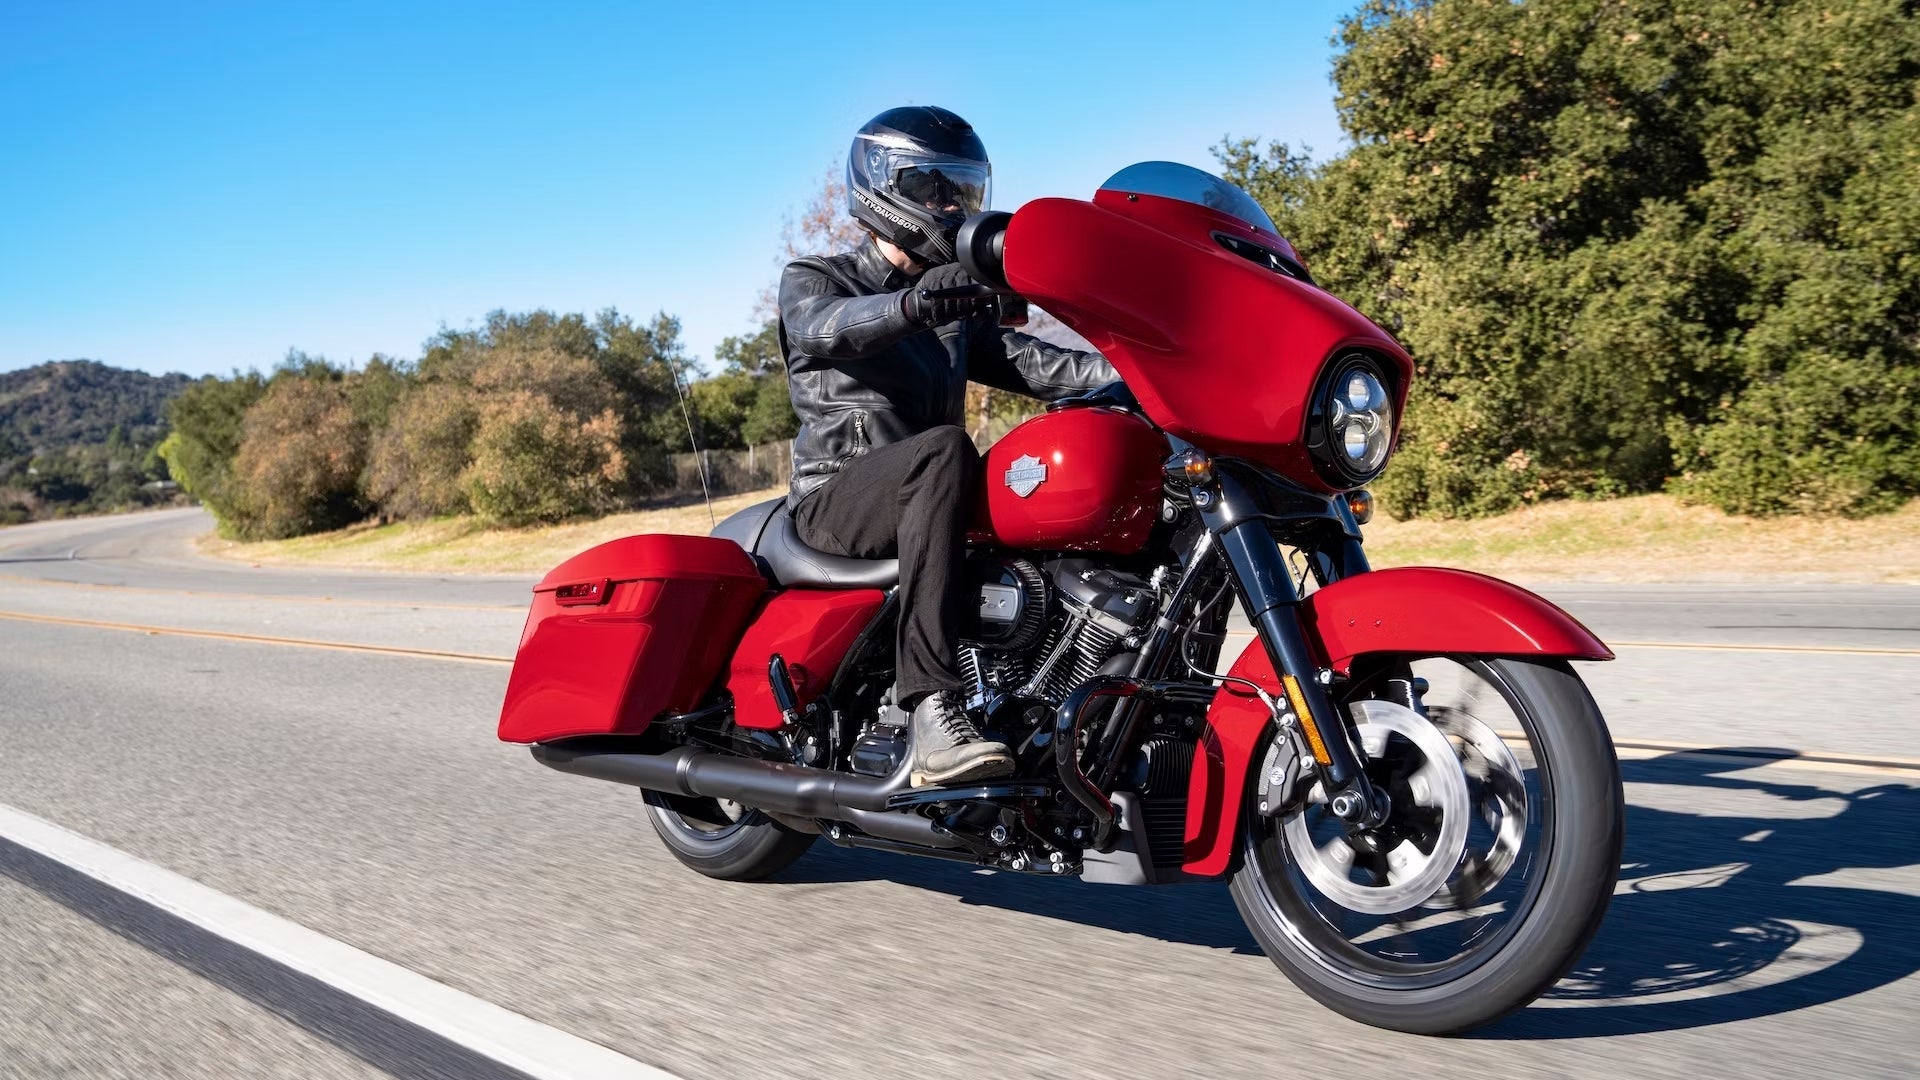 Street Glide Unrivaled Comfort for Long-Distance Touring